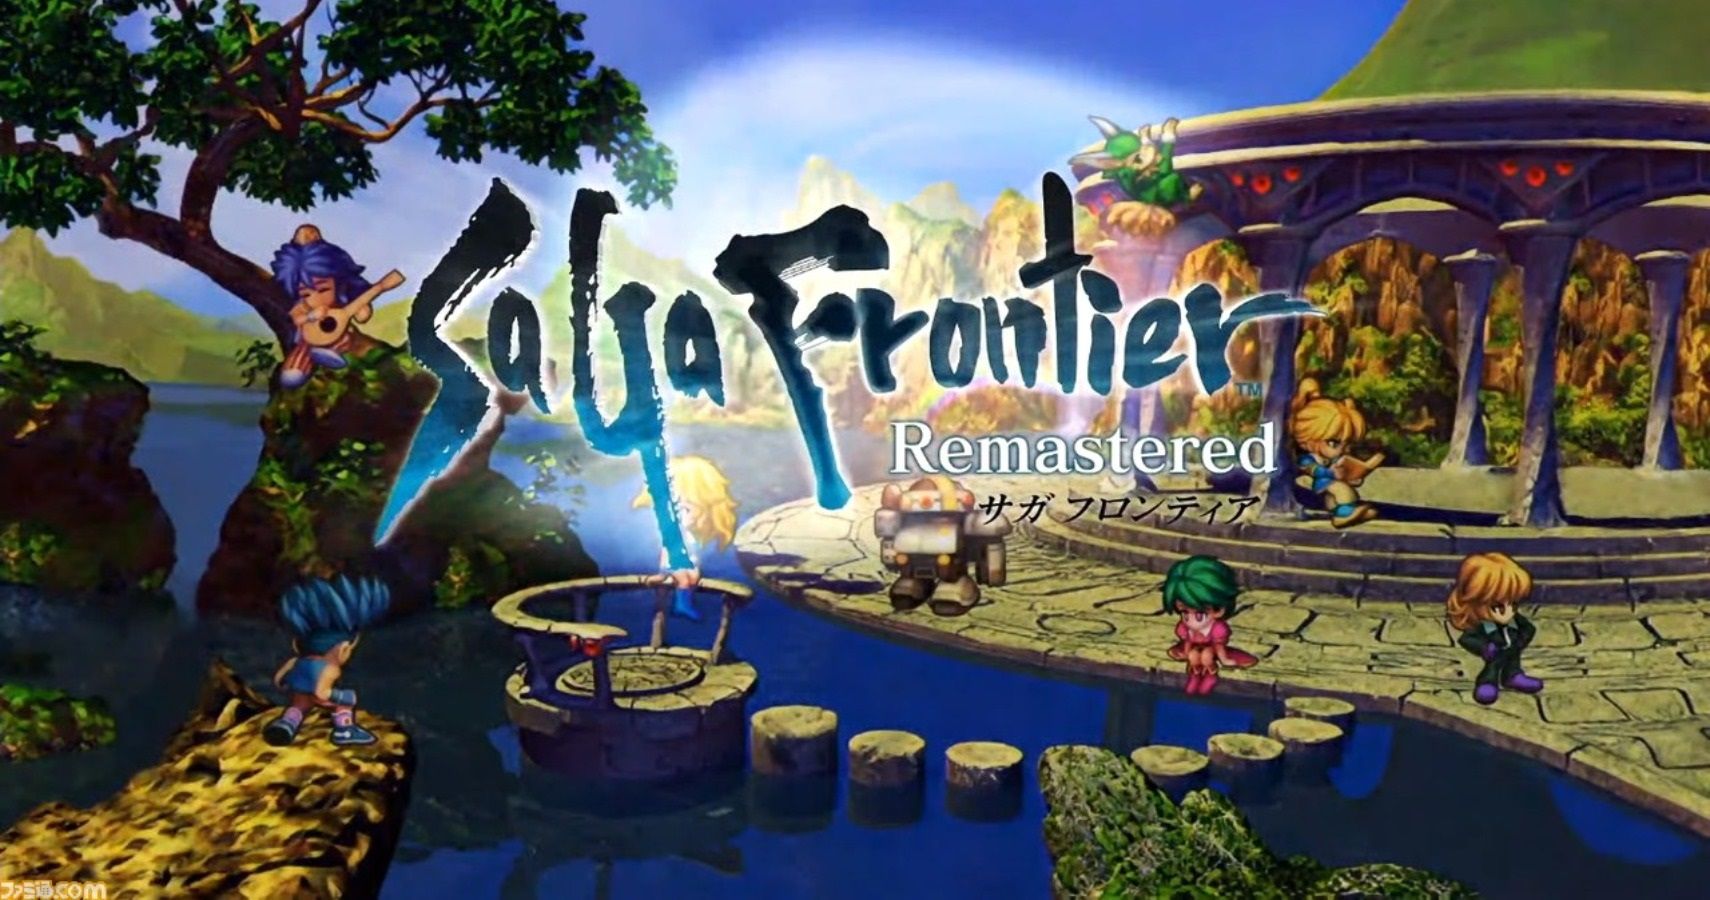 Saga Frontier Remastered features non linear gameplay and multiple endings